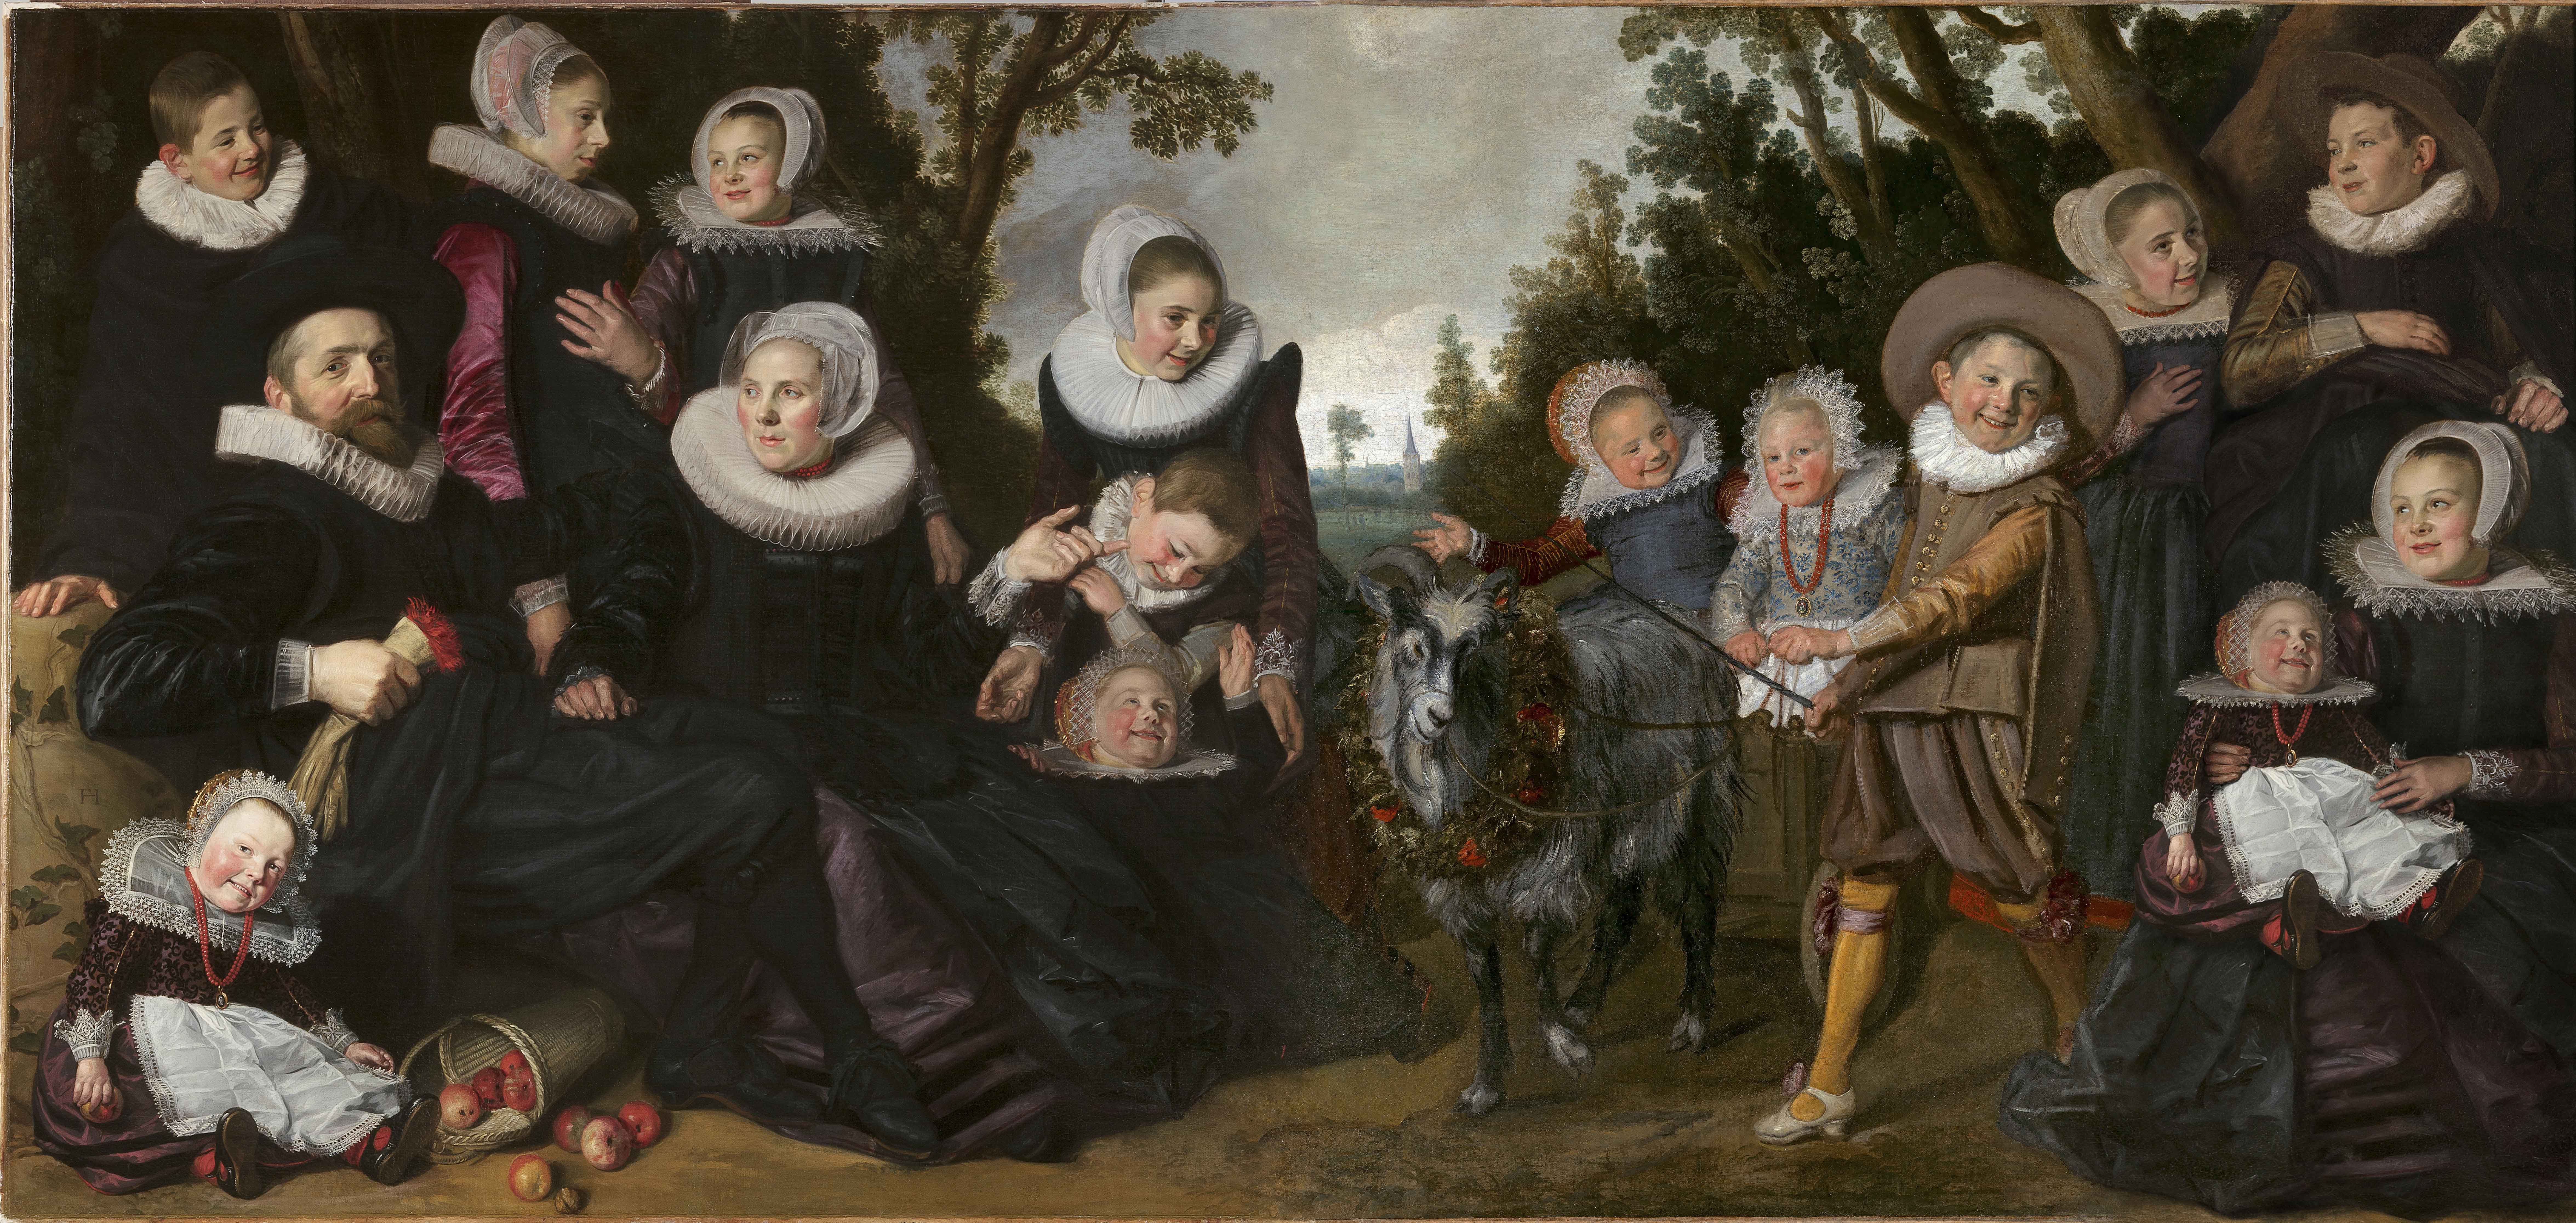 A painting showing a man smiling and reclining in pilgrims clothing. a woman is beside him as if trying to get his attention. They are surrounded by 12 children, all dressed like pilgrims